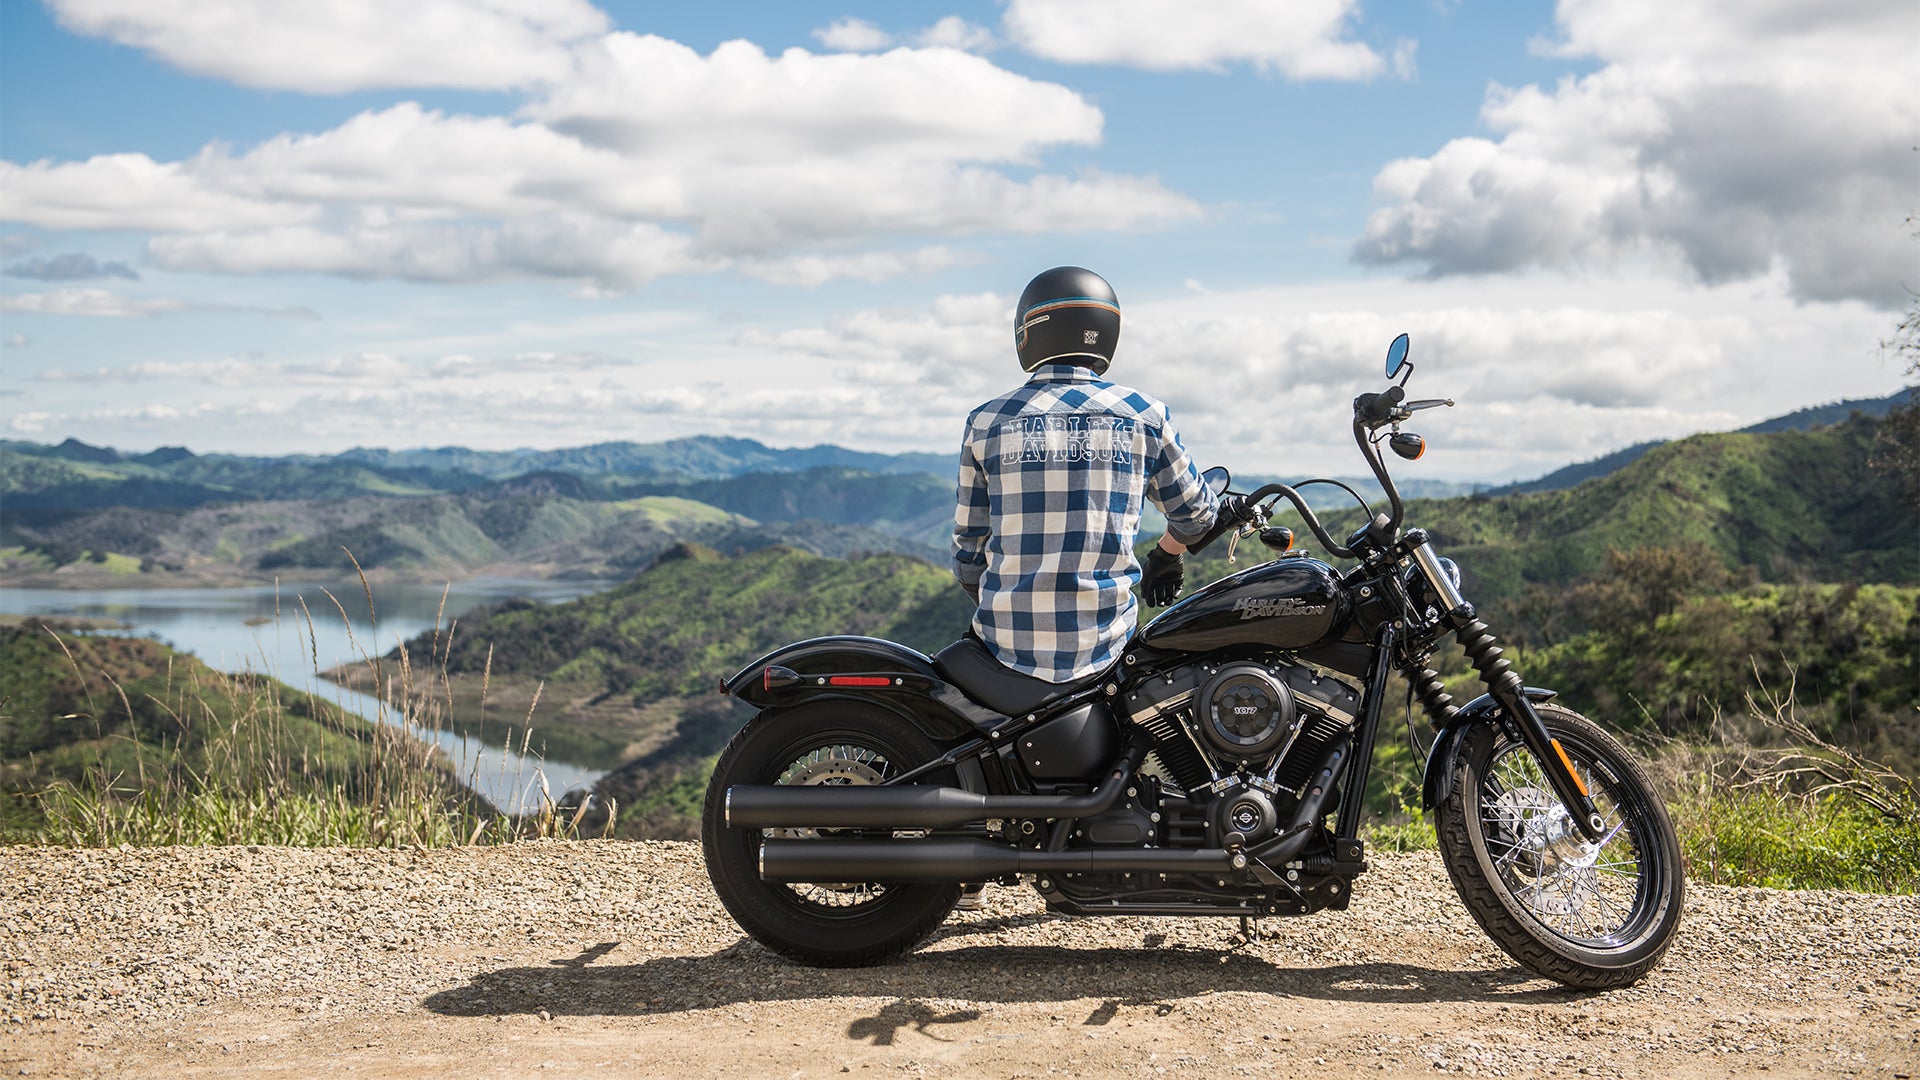 A man sitting on a black motorcycle parked on the side of a dirt road overlooking some green mountains and a lake.